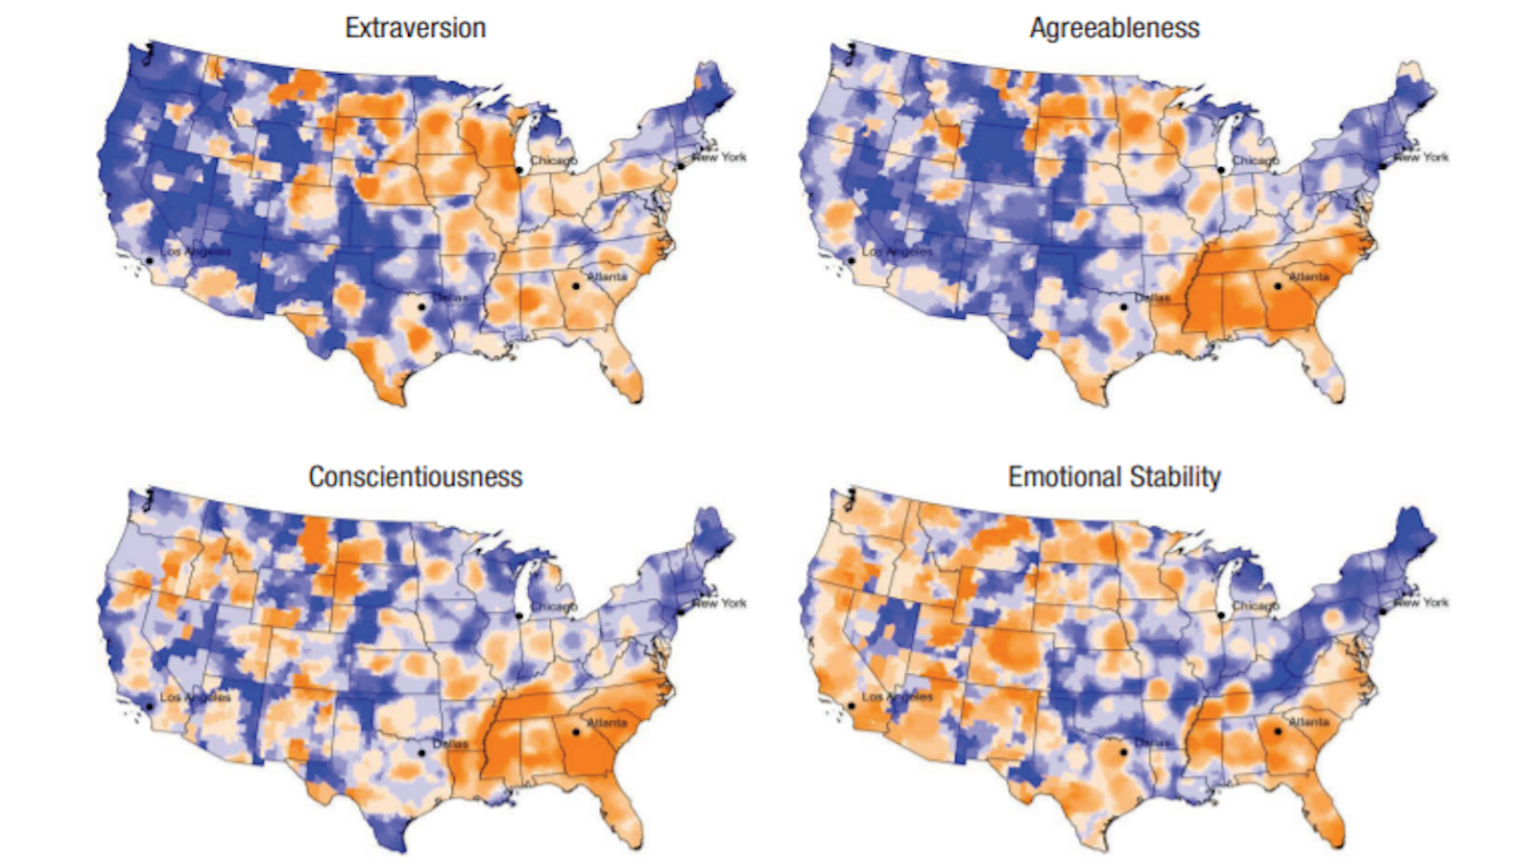 Geopsychology: Your personality depends on where you live